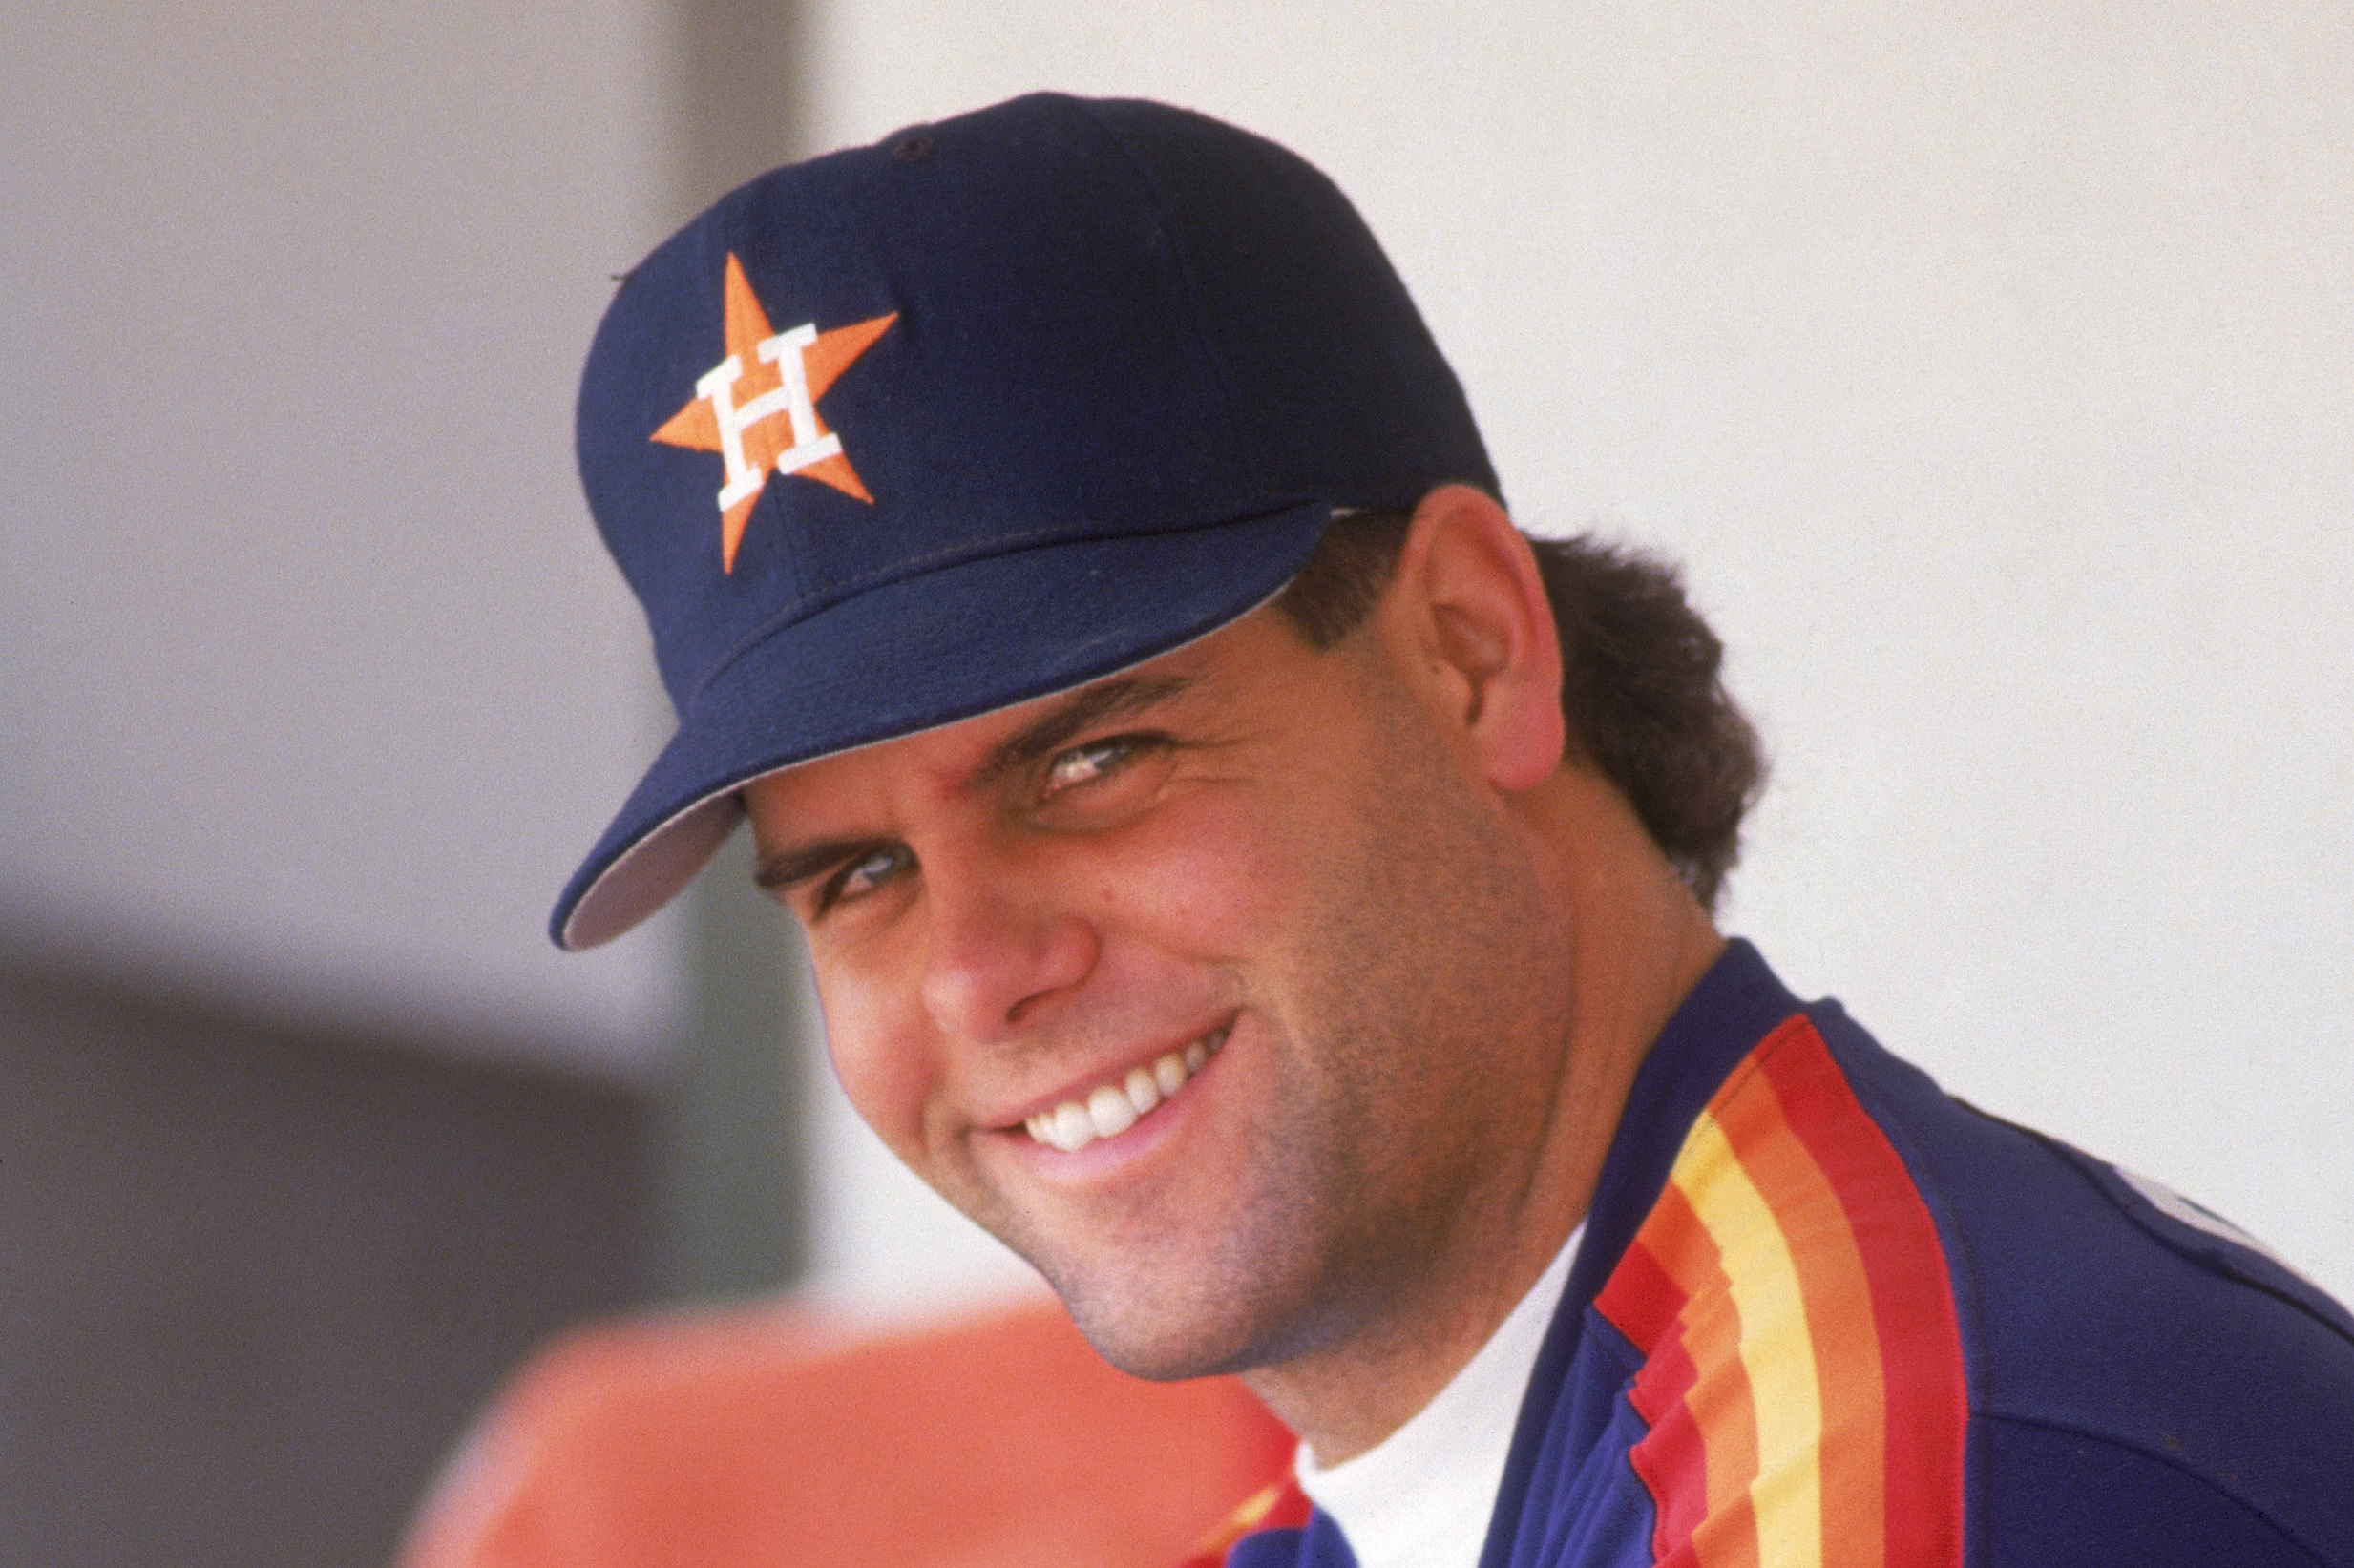 The Astros Daily - In Memory of Ken Caminiti